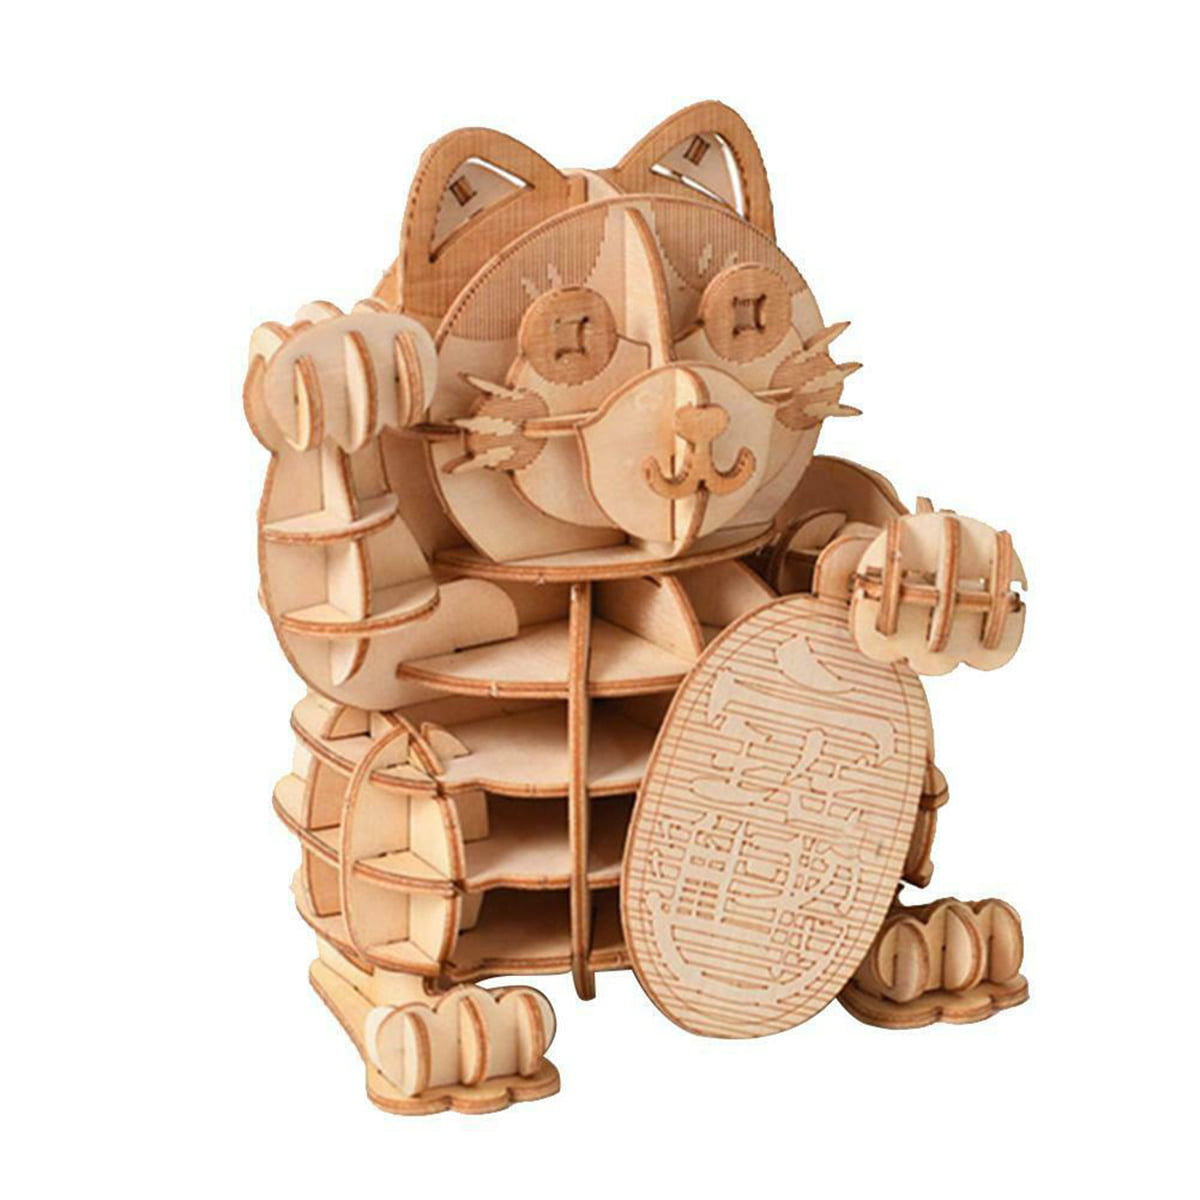 Kids Teen 3D Puzzle DIY Animal Toy Model Wooden Craft Jigsaw Puzzle Desk Decor 